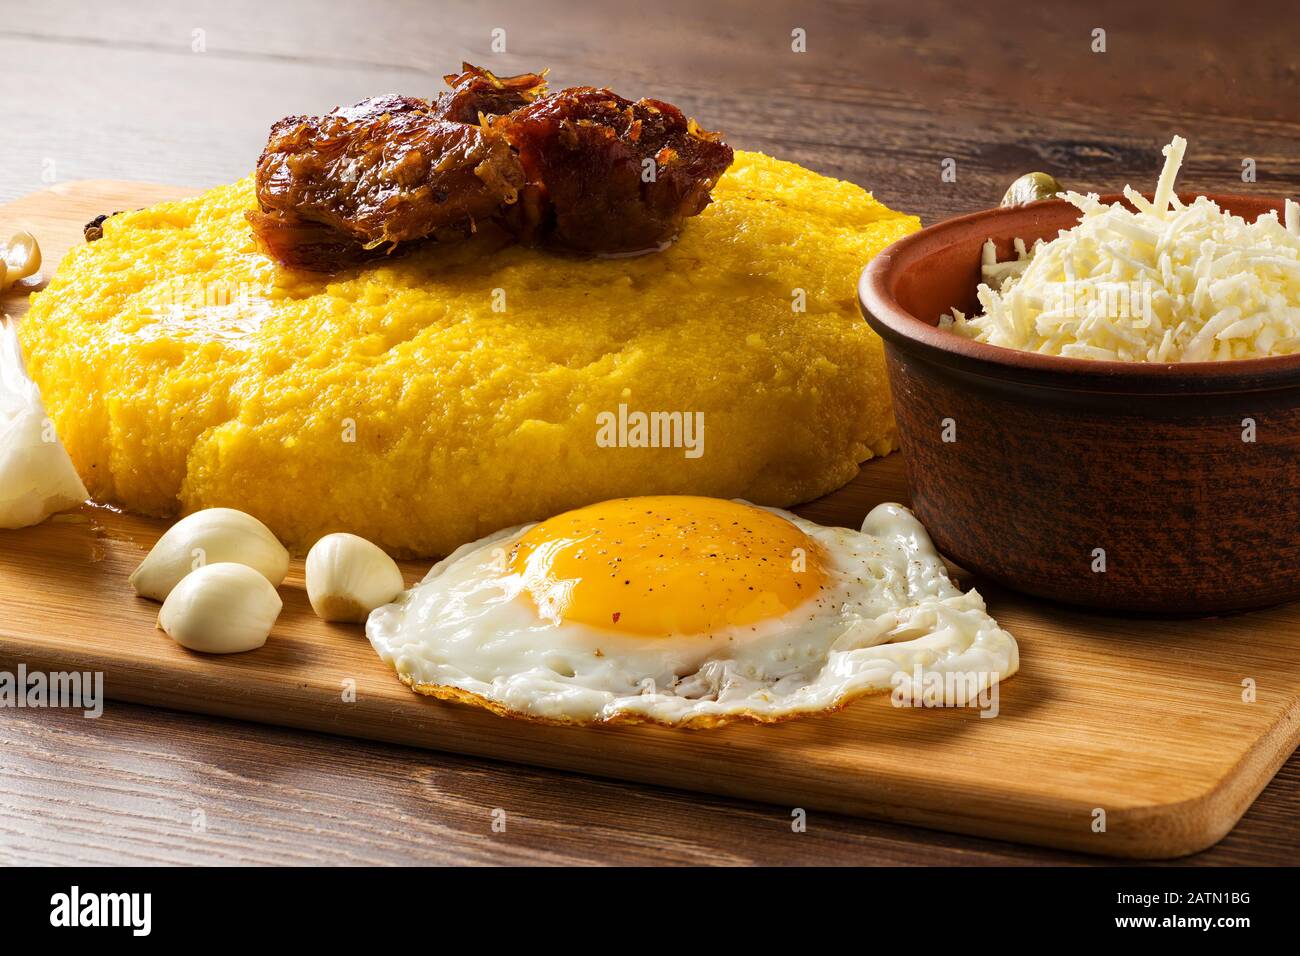 hominy egg meat and garlic on a wooden plateau Stock Photo